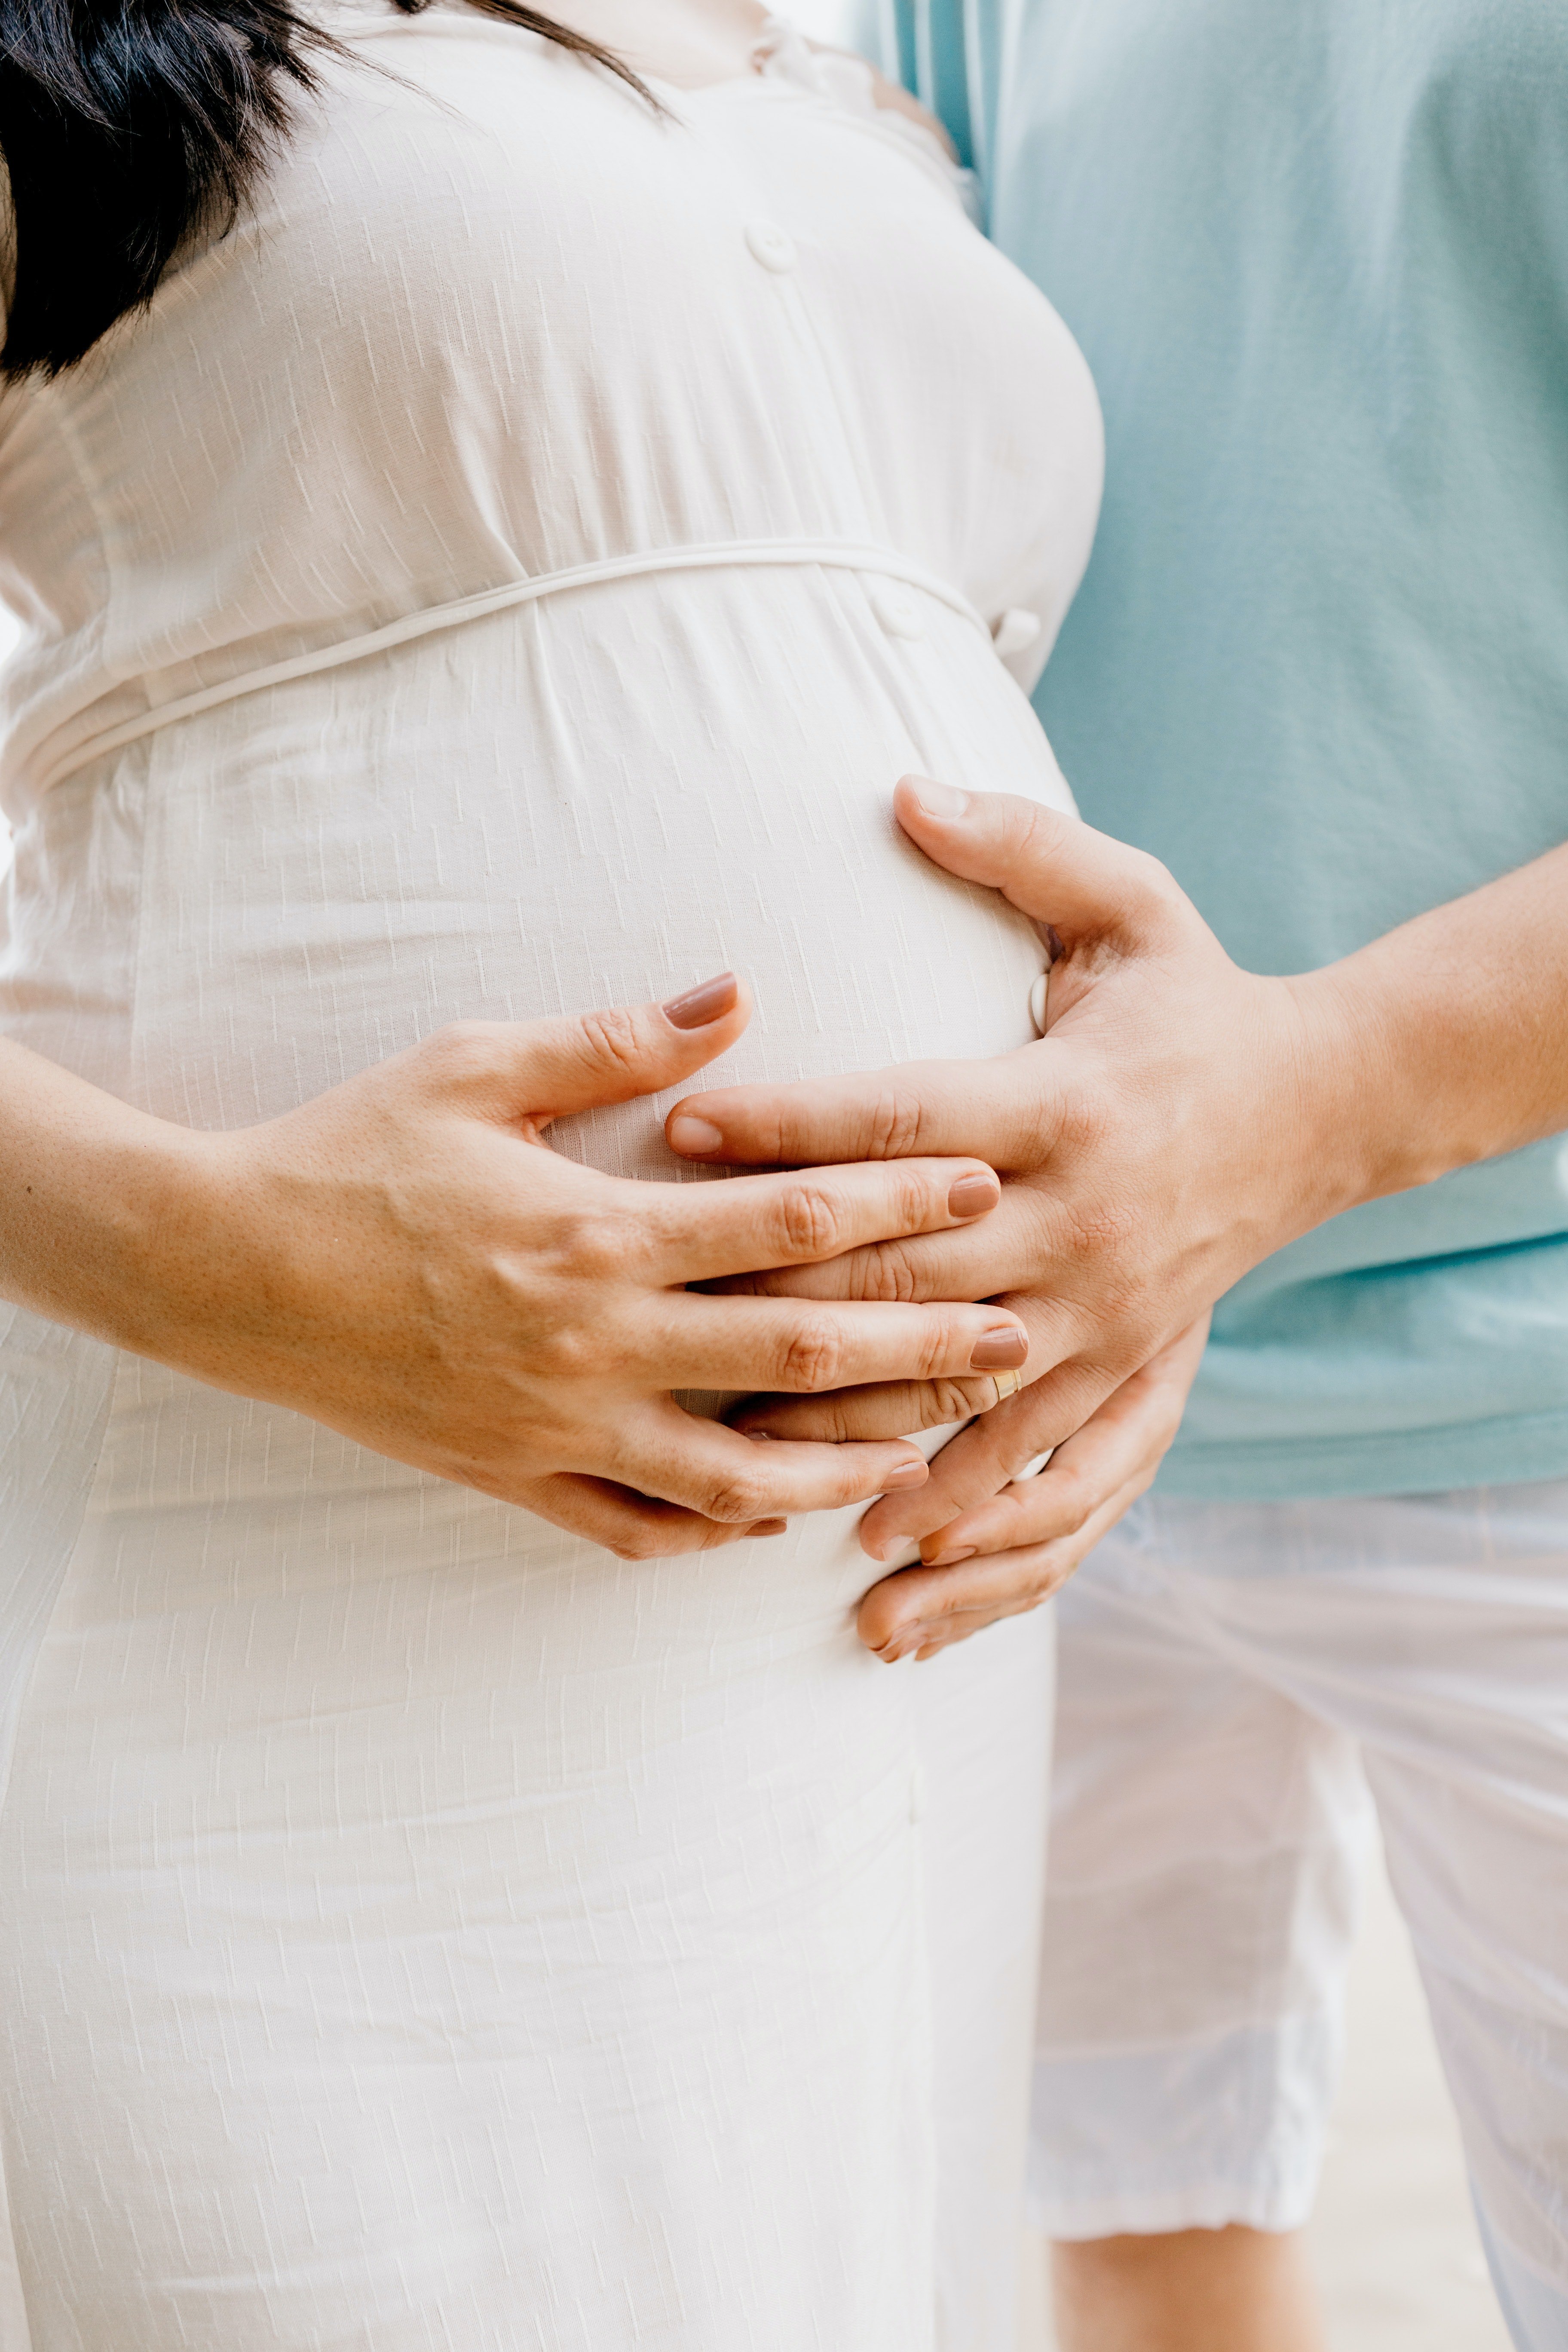 Hands touching a pregnant woman's baby bump. | Source: Pexels